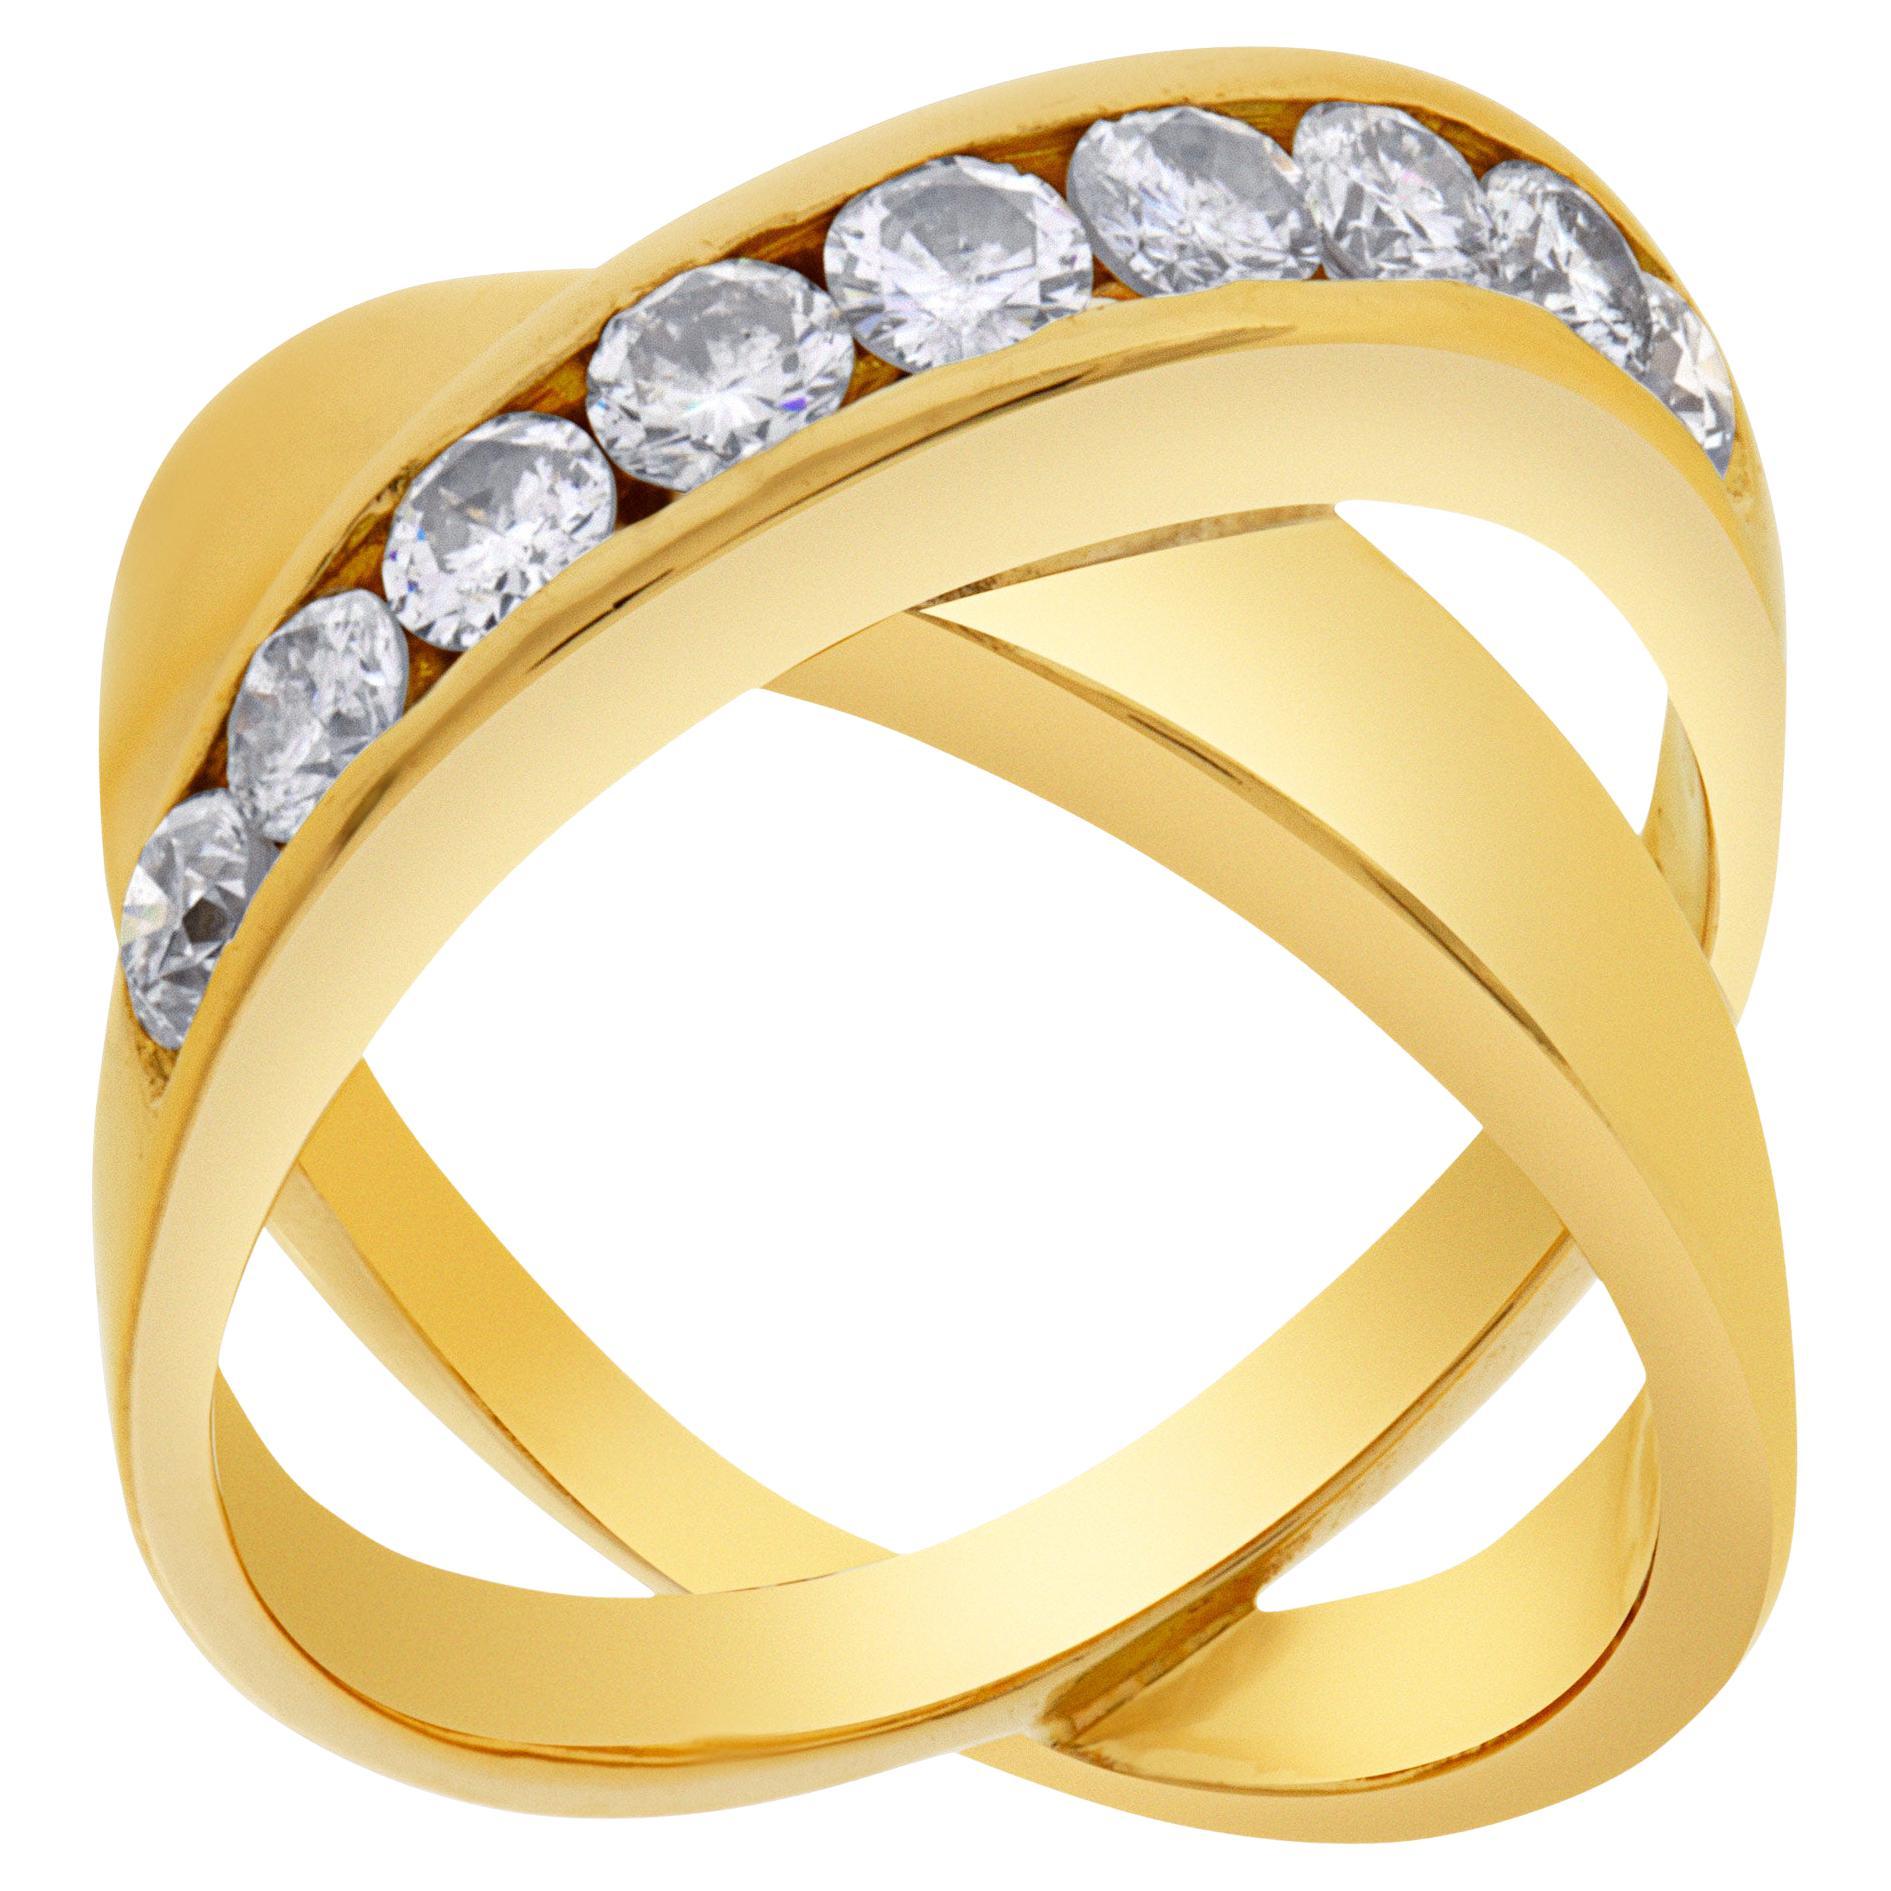 Diamond "X" Kiss Ring in 14k Gold with 0.90 Carats in Round Diamond Accents For Sale